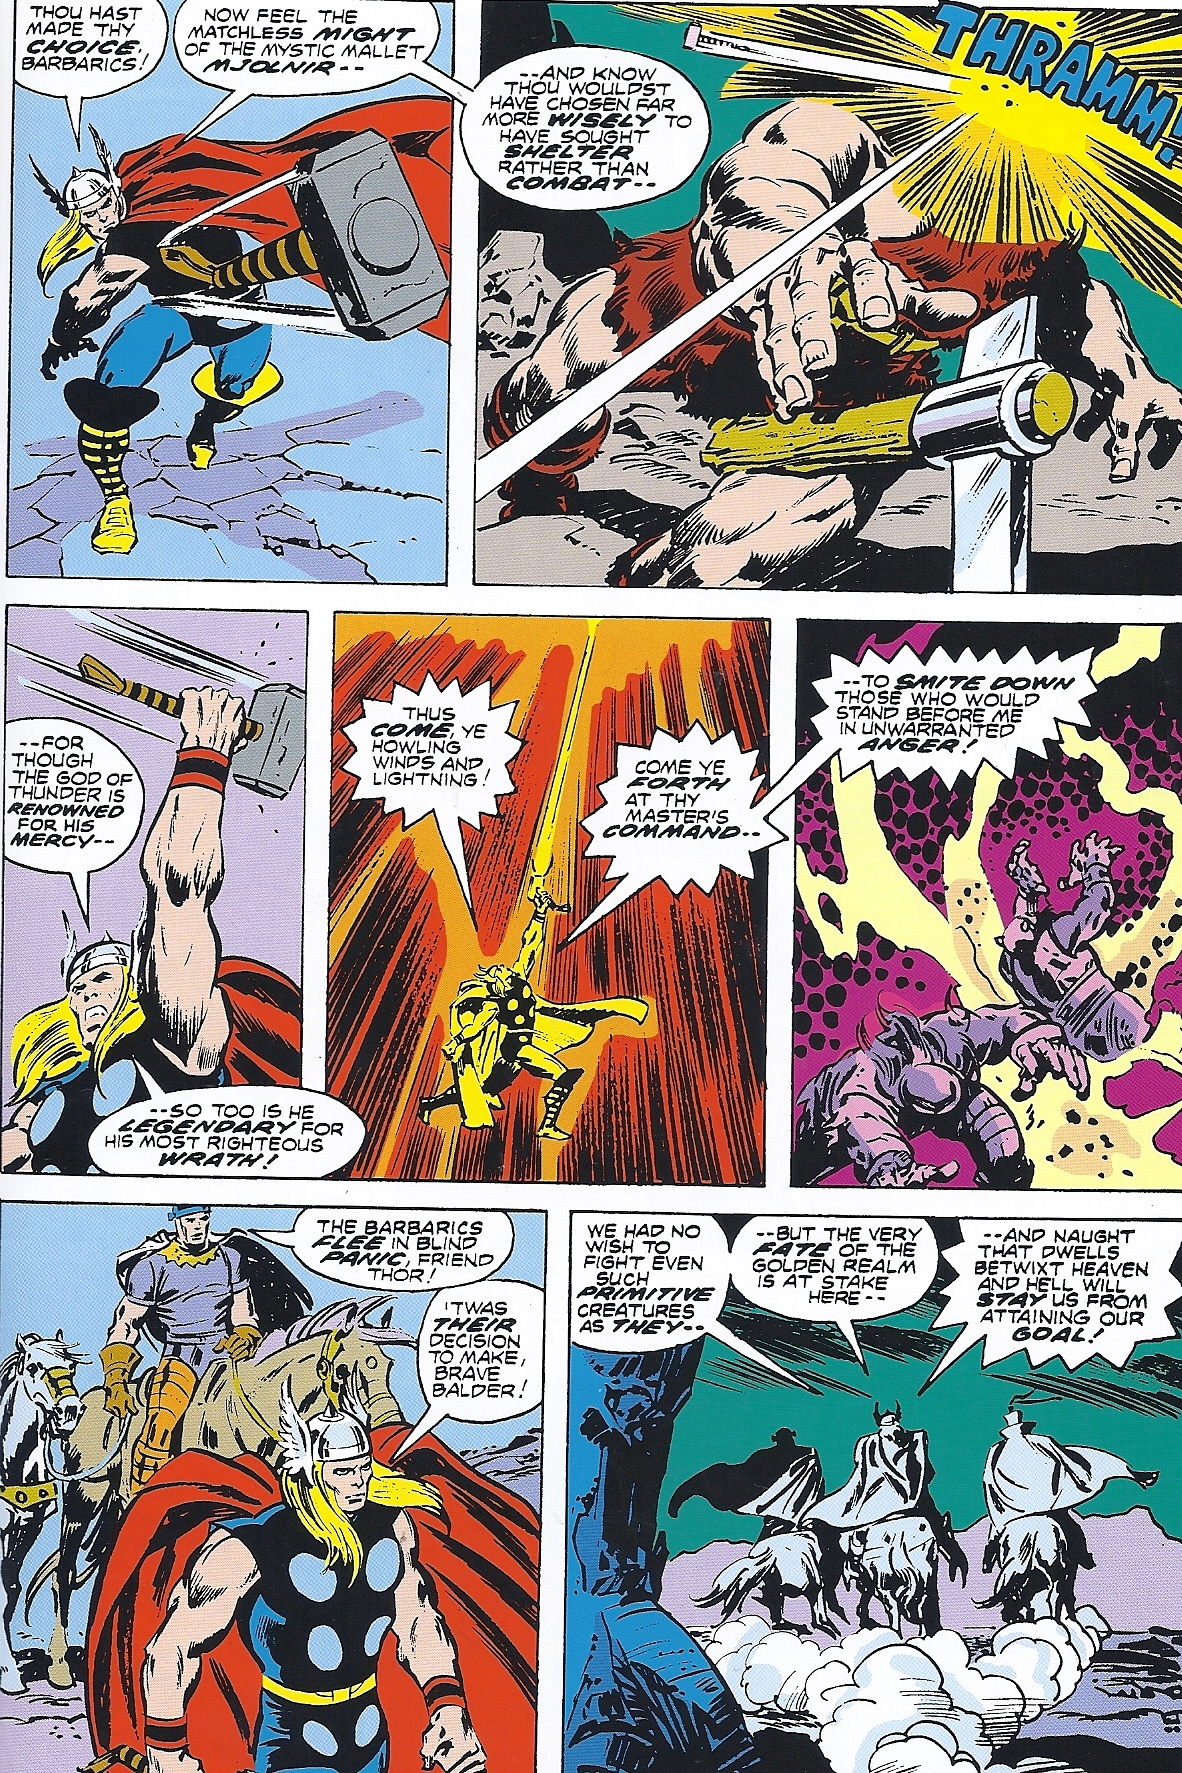 Thor in action in Asgard